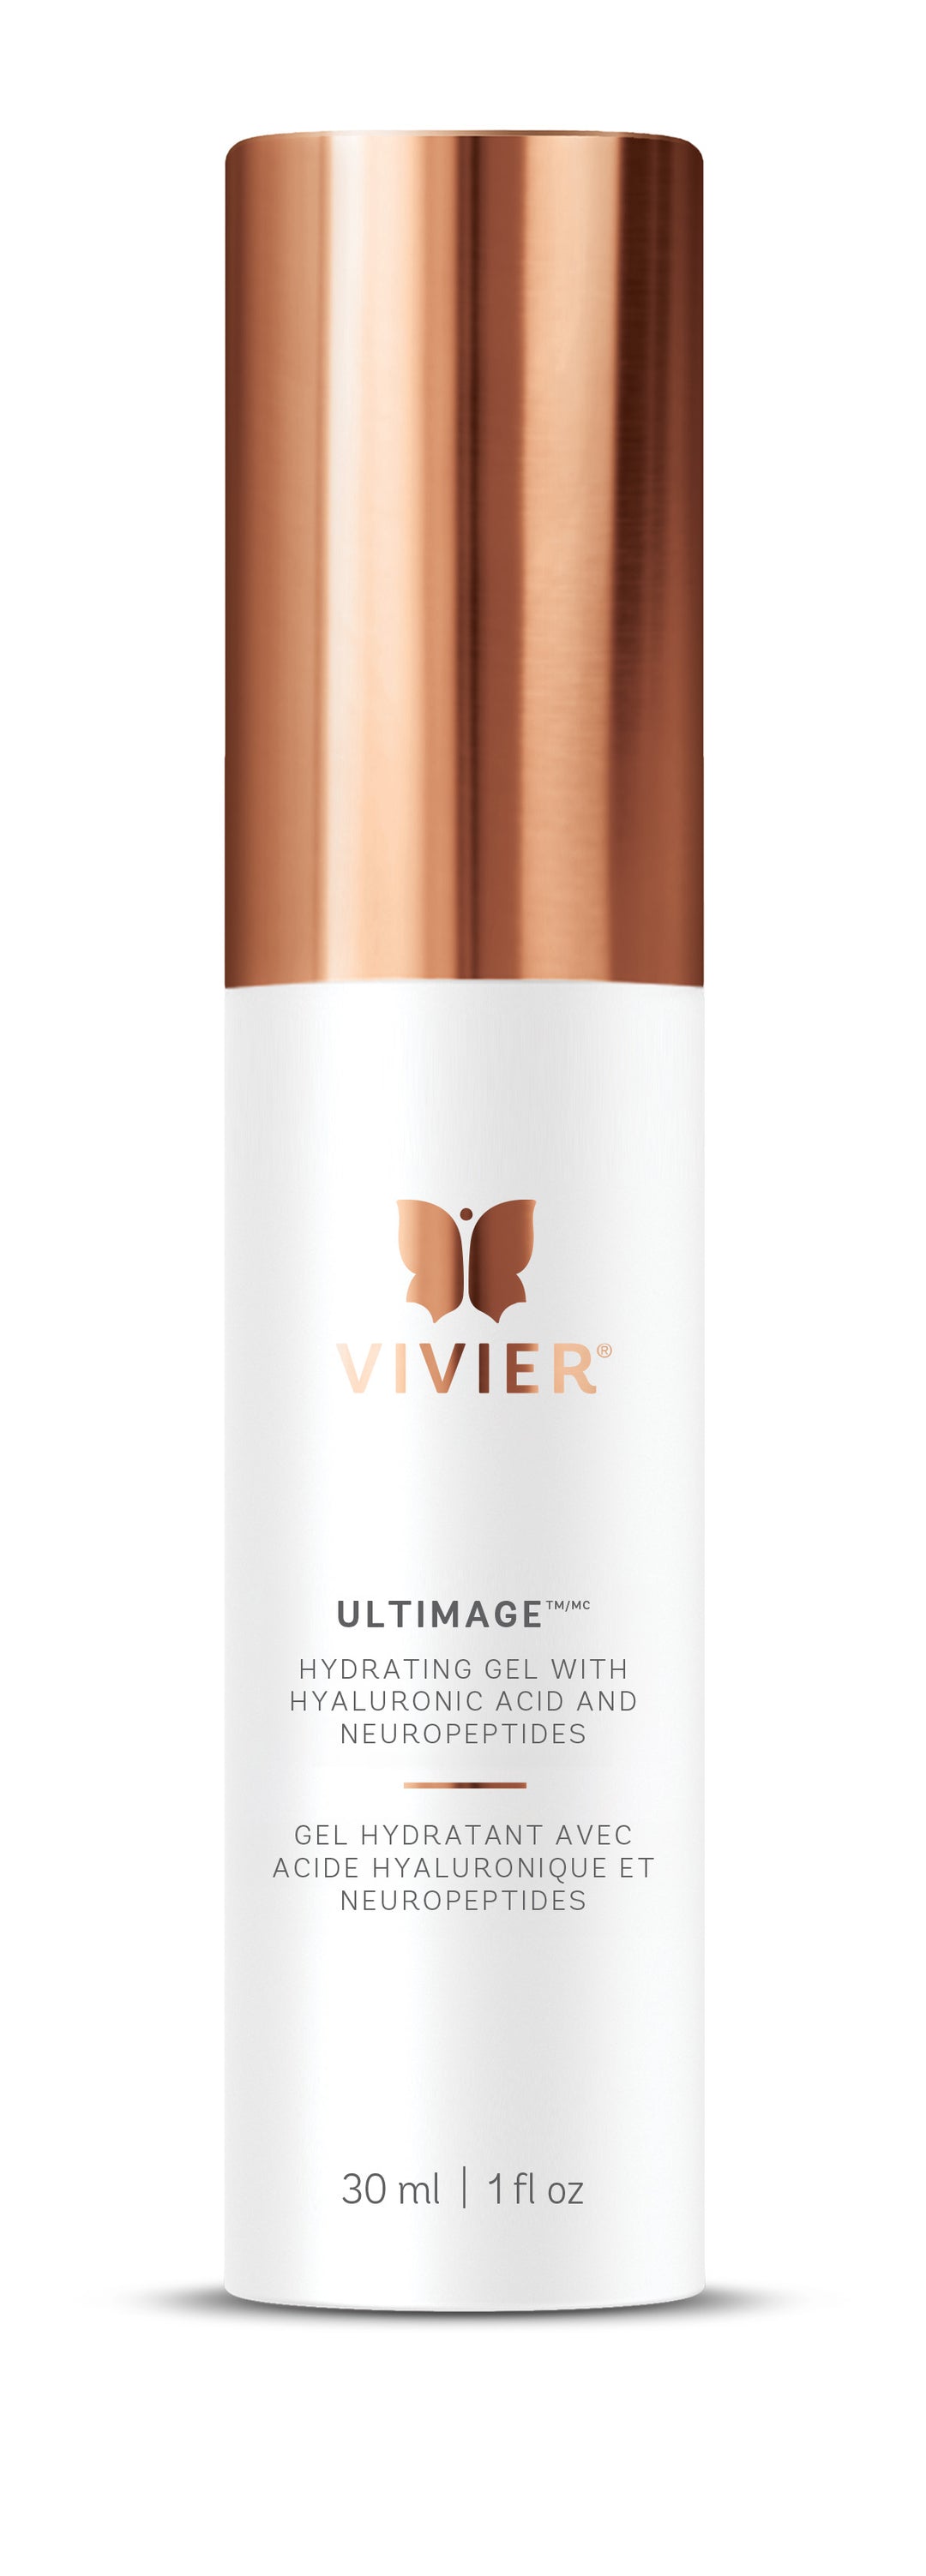 Ultimage hydrating gel with hyal acid